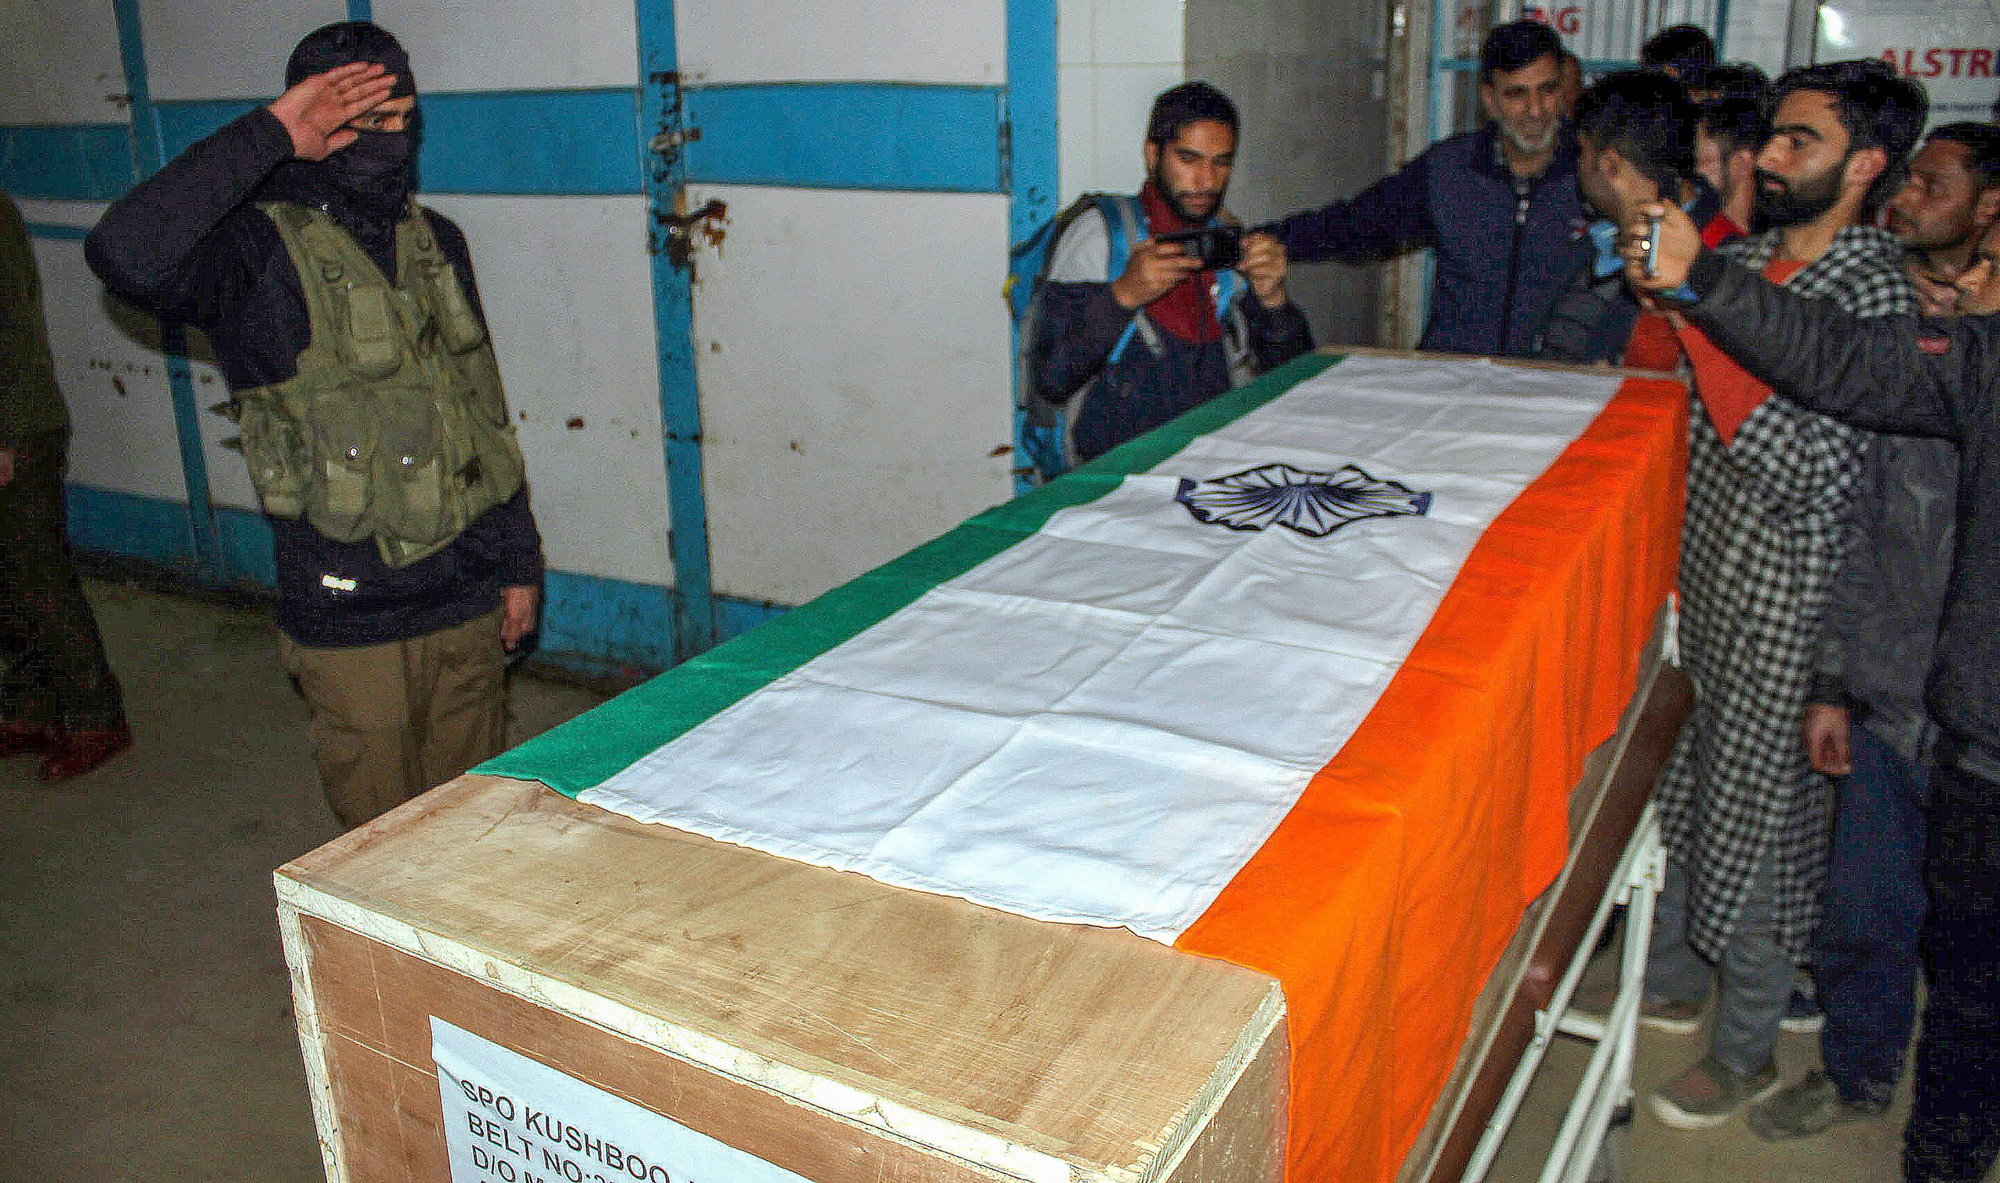 The mortal remains of SPO Khushboo Jan, who was shot dead by militants at her home, in Shopian on Saturday, March 16, 2019.